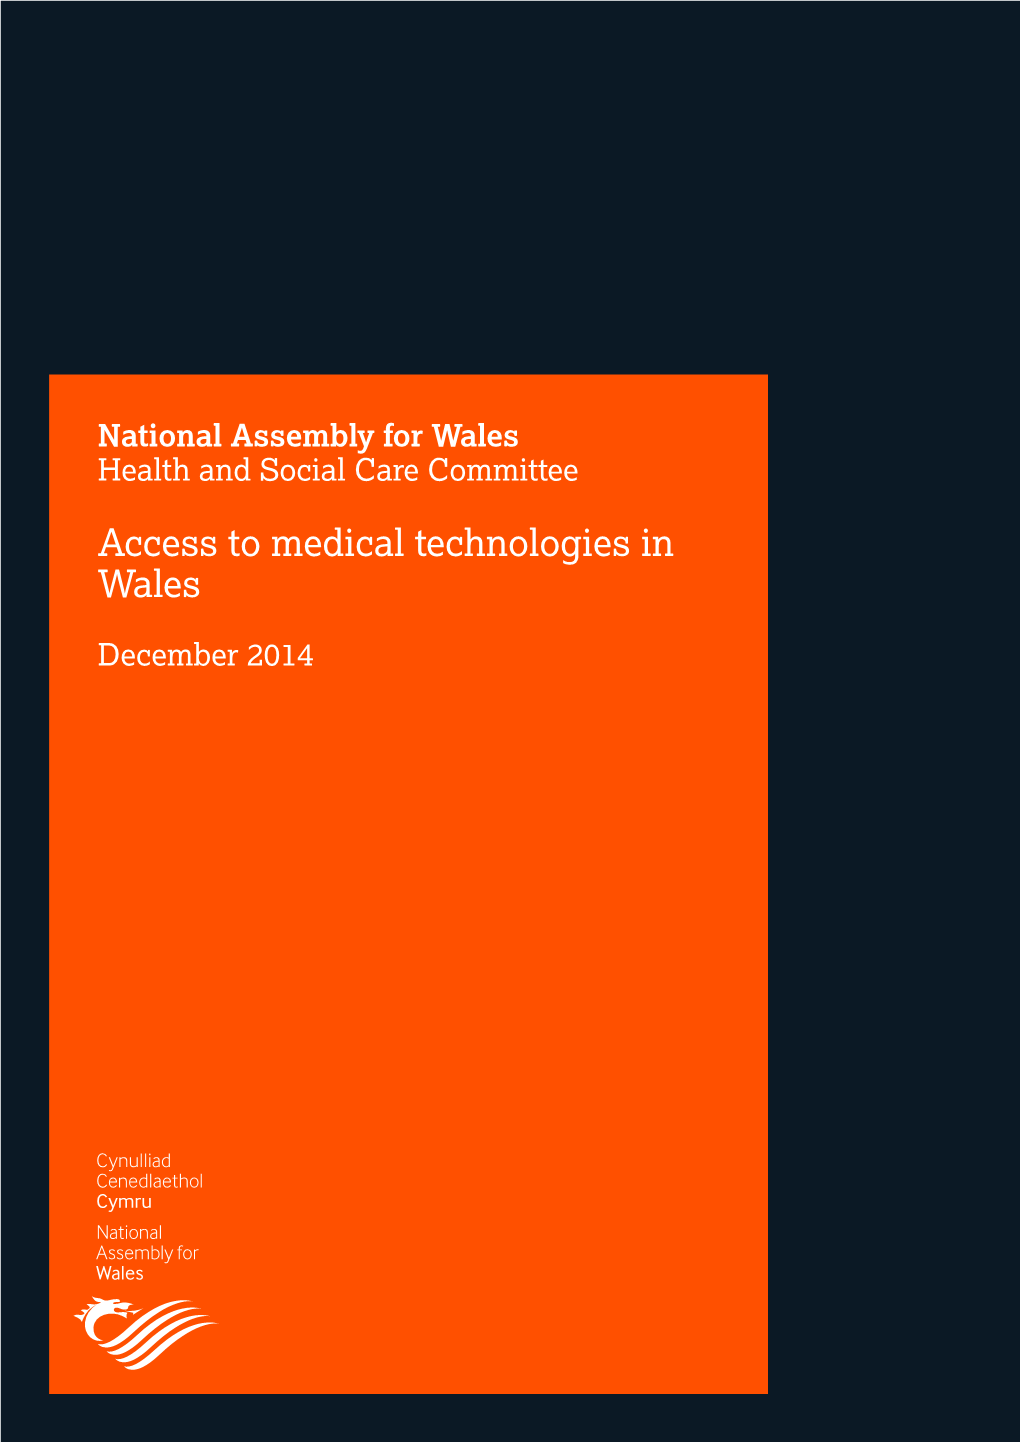 Access to Medical Technologies in Wales